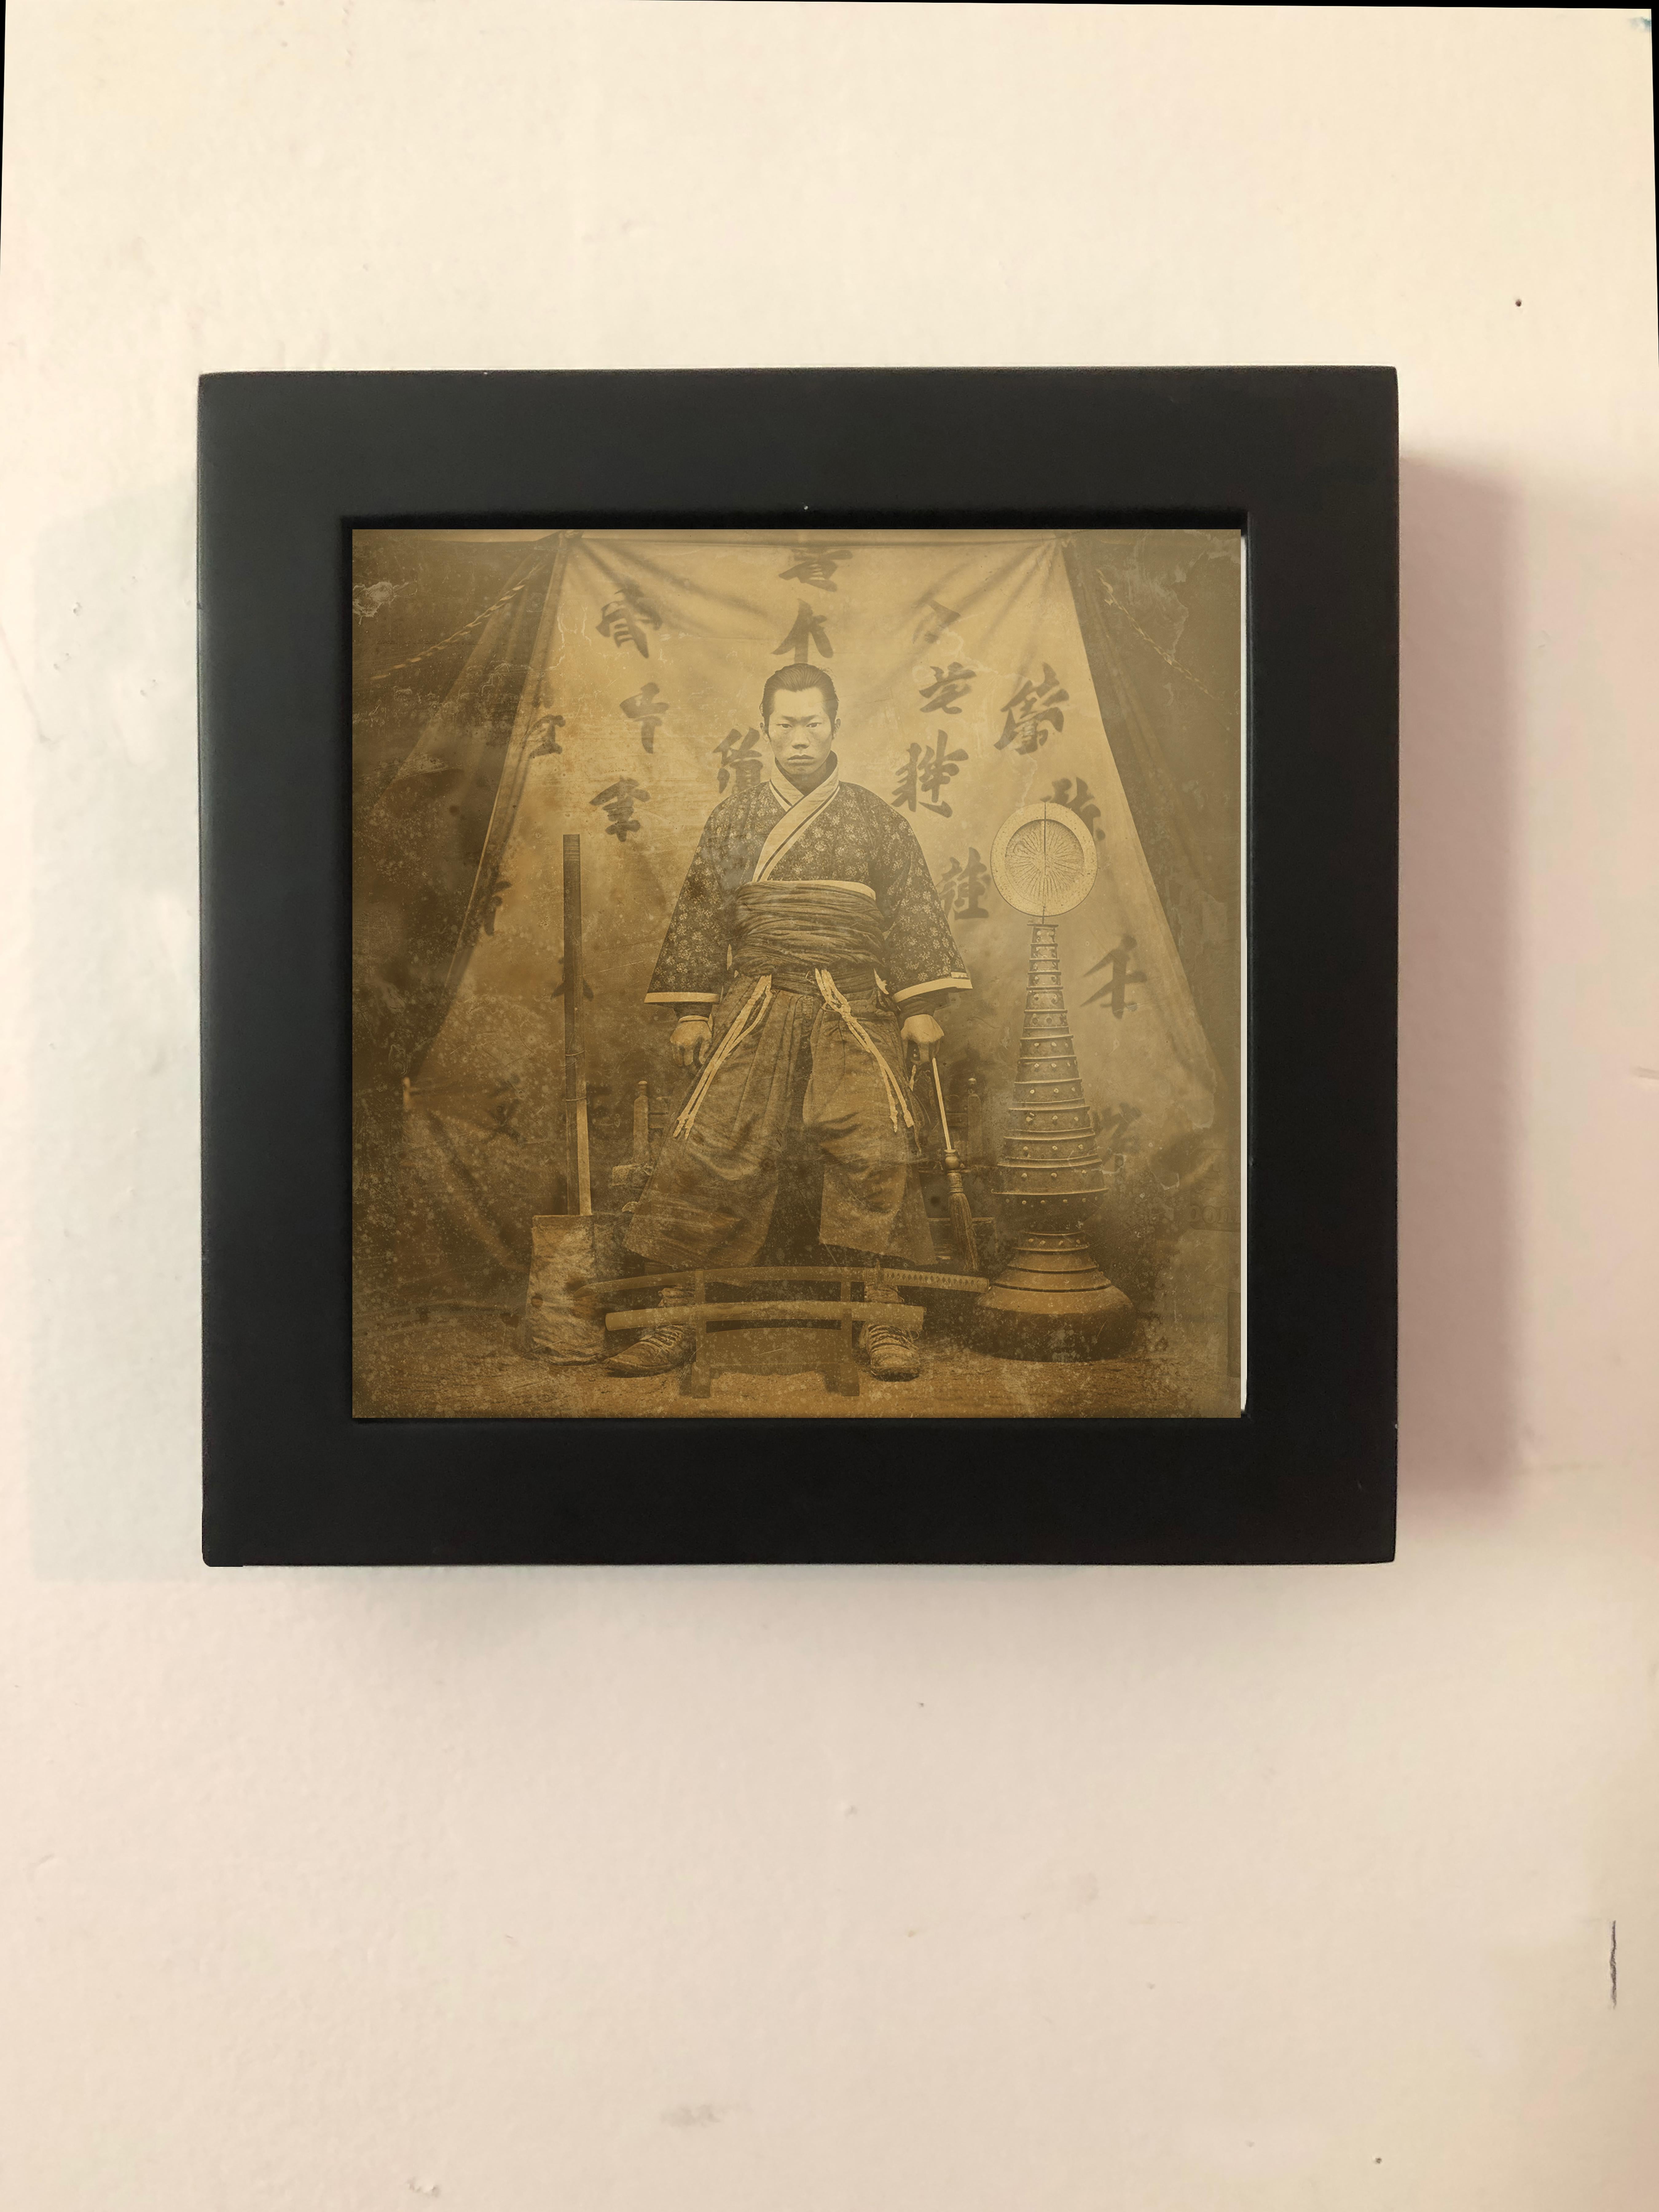 Japanese Samurai-exotic daguerreotype reproduction Framed - Surrealist Photograph by FPA Francis Pavy Artist